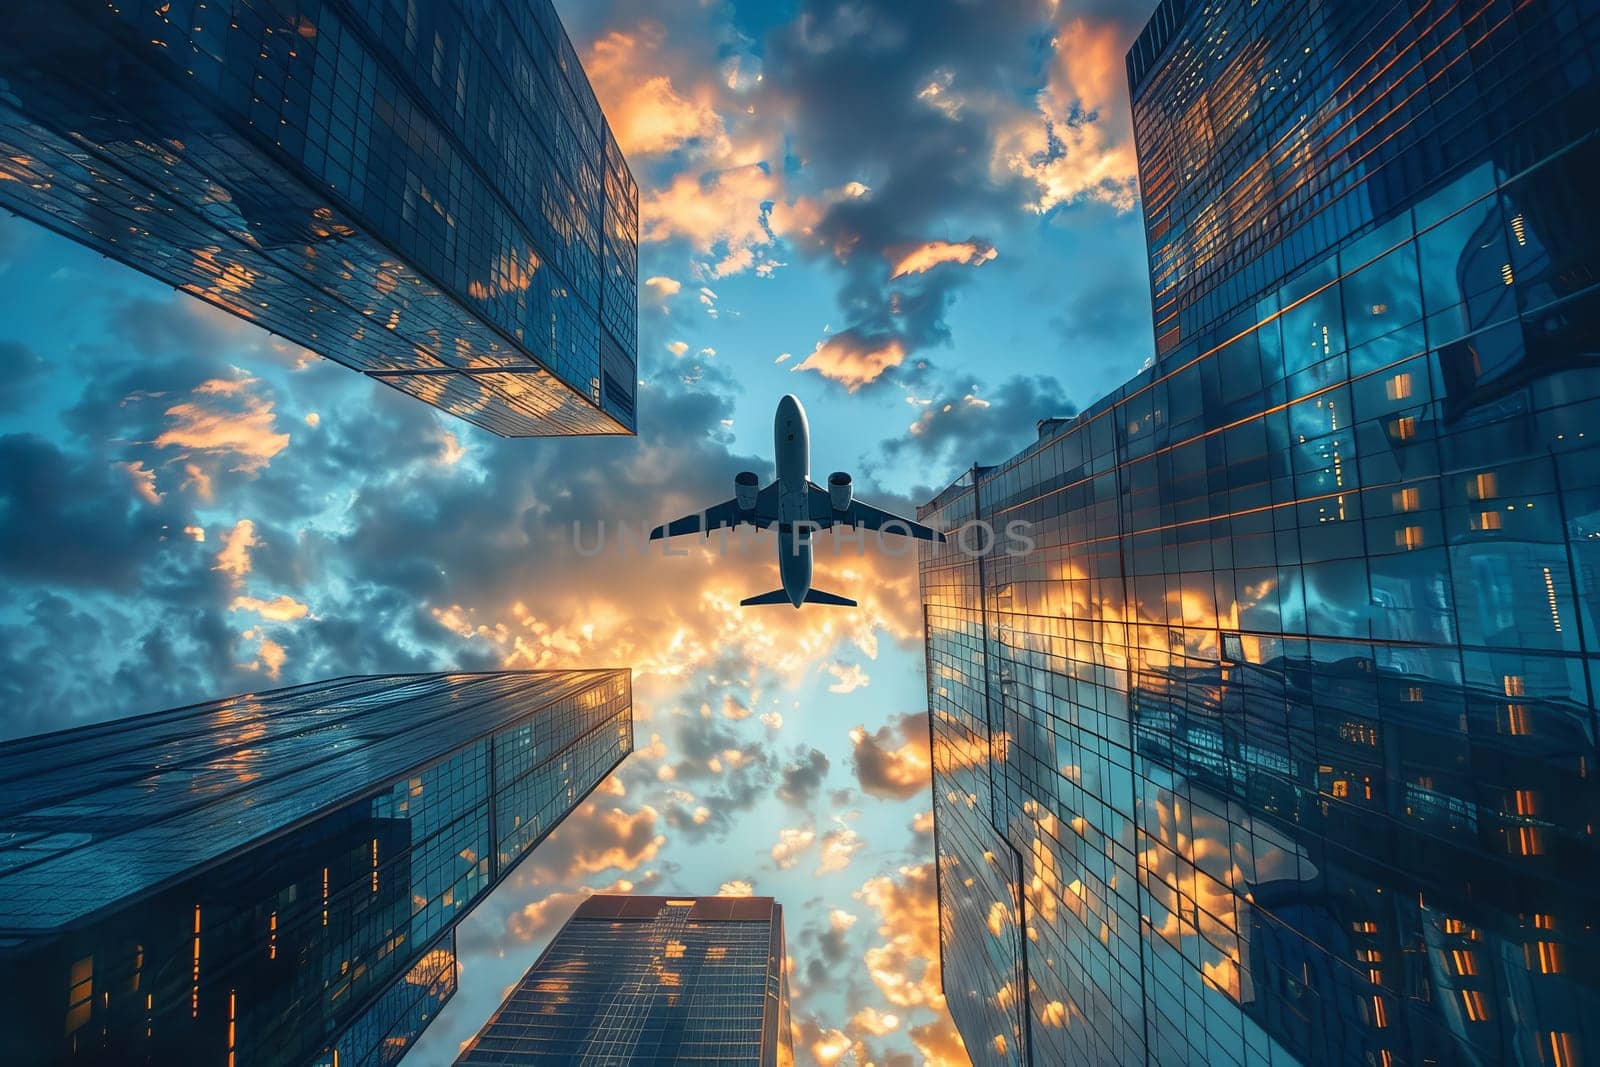 A large airplane is flying over a city with tall buildings. The sky is cloudy and the sun is setting, creating a beautiful and serene atmosphere